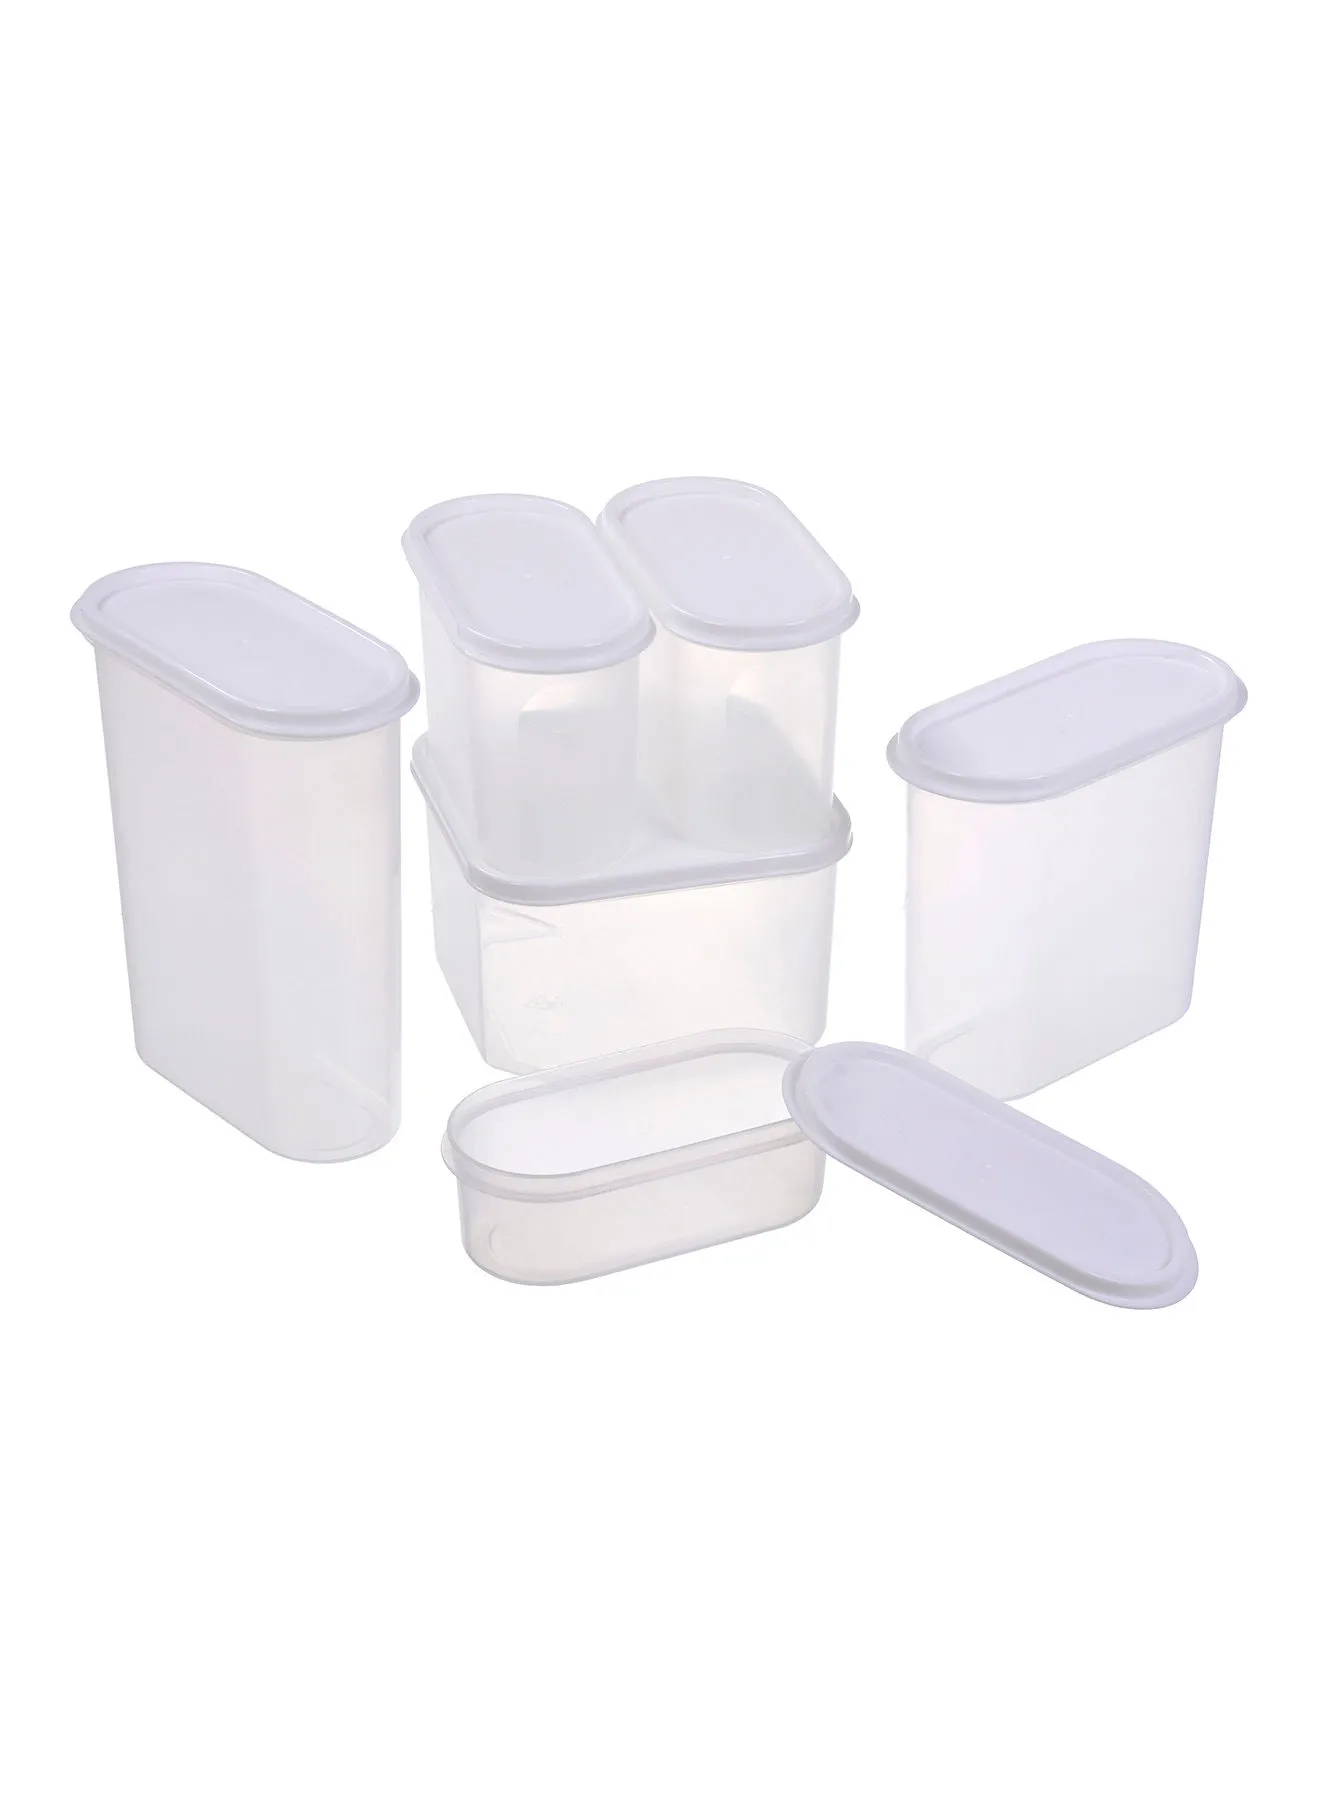 Amal 6 Piece Food Storage Container Set - Food Storage Box - Storage Boxes - Kitchen Cabinet Organizers - Food Container - Clear/White 3L + 1.25L x2 + 0.6L + 1.9L + 2.5LLiters